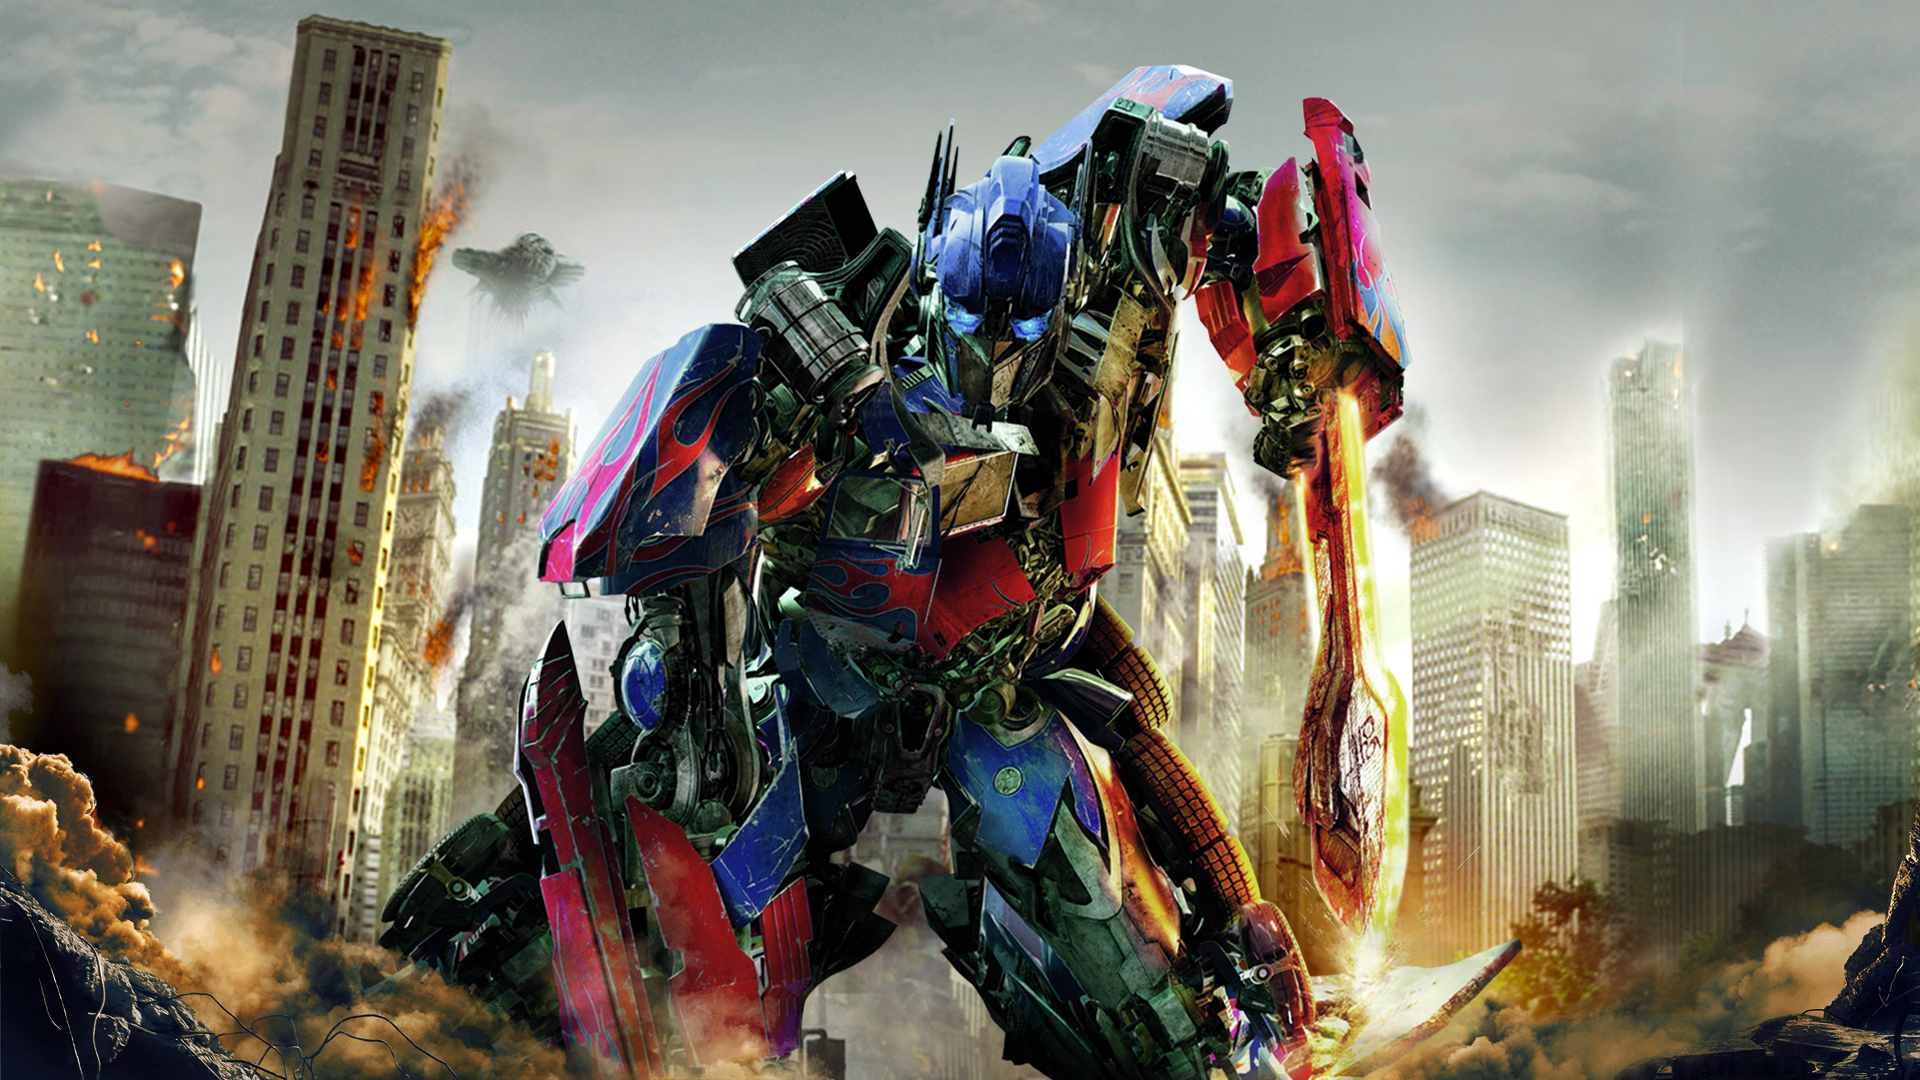 Transformers Hd Wallpapers For Mobile Phones